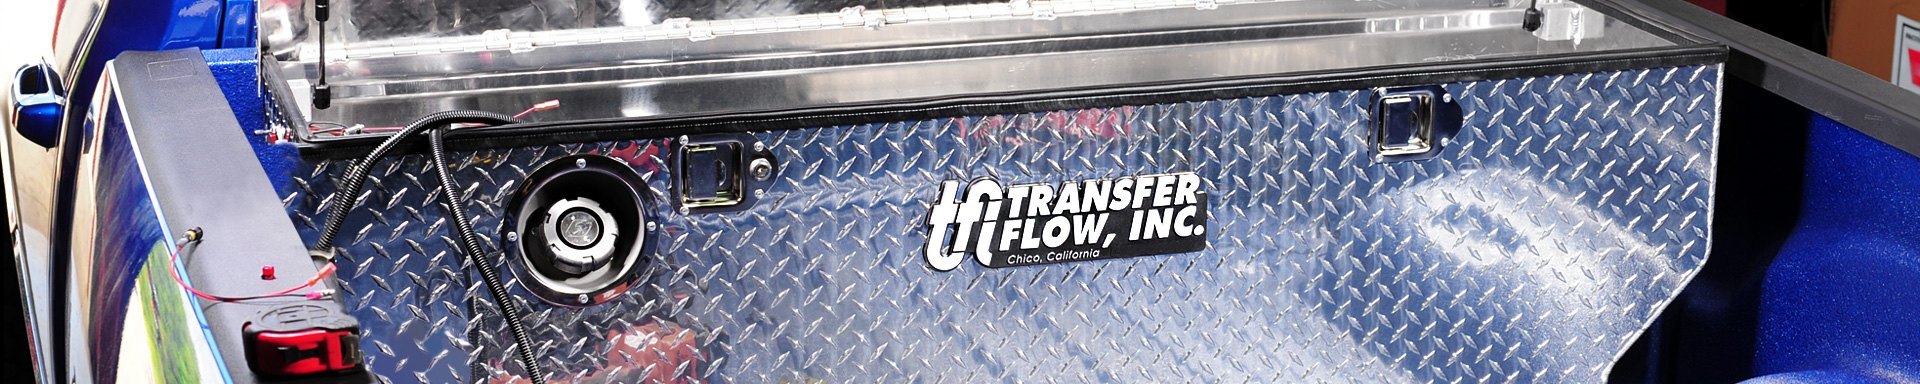 Transfer Flow Bed Accessories